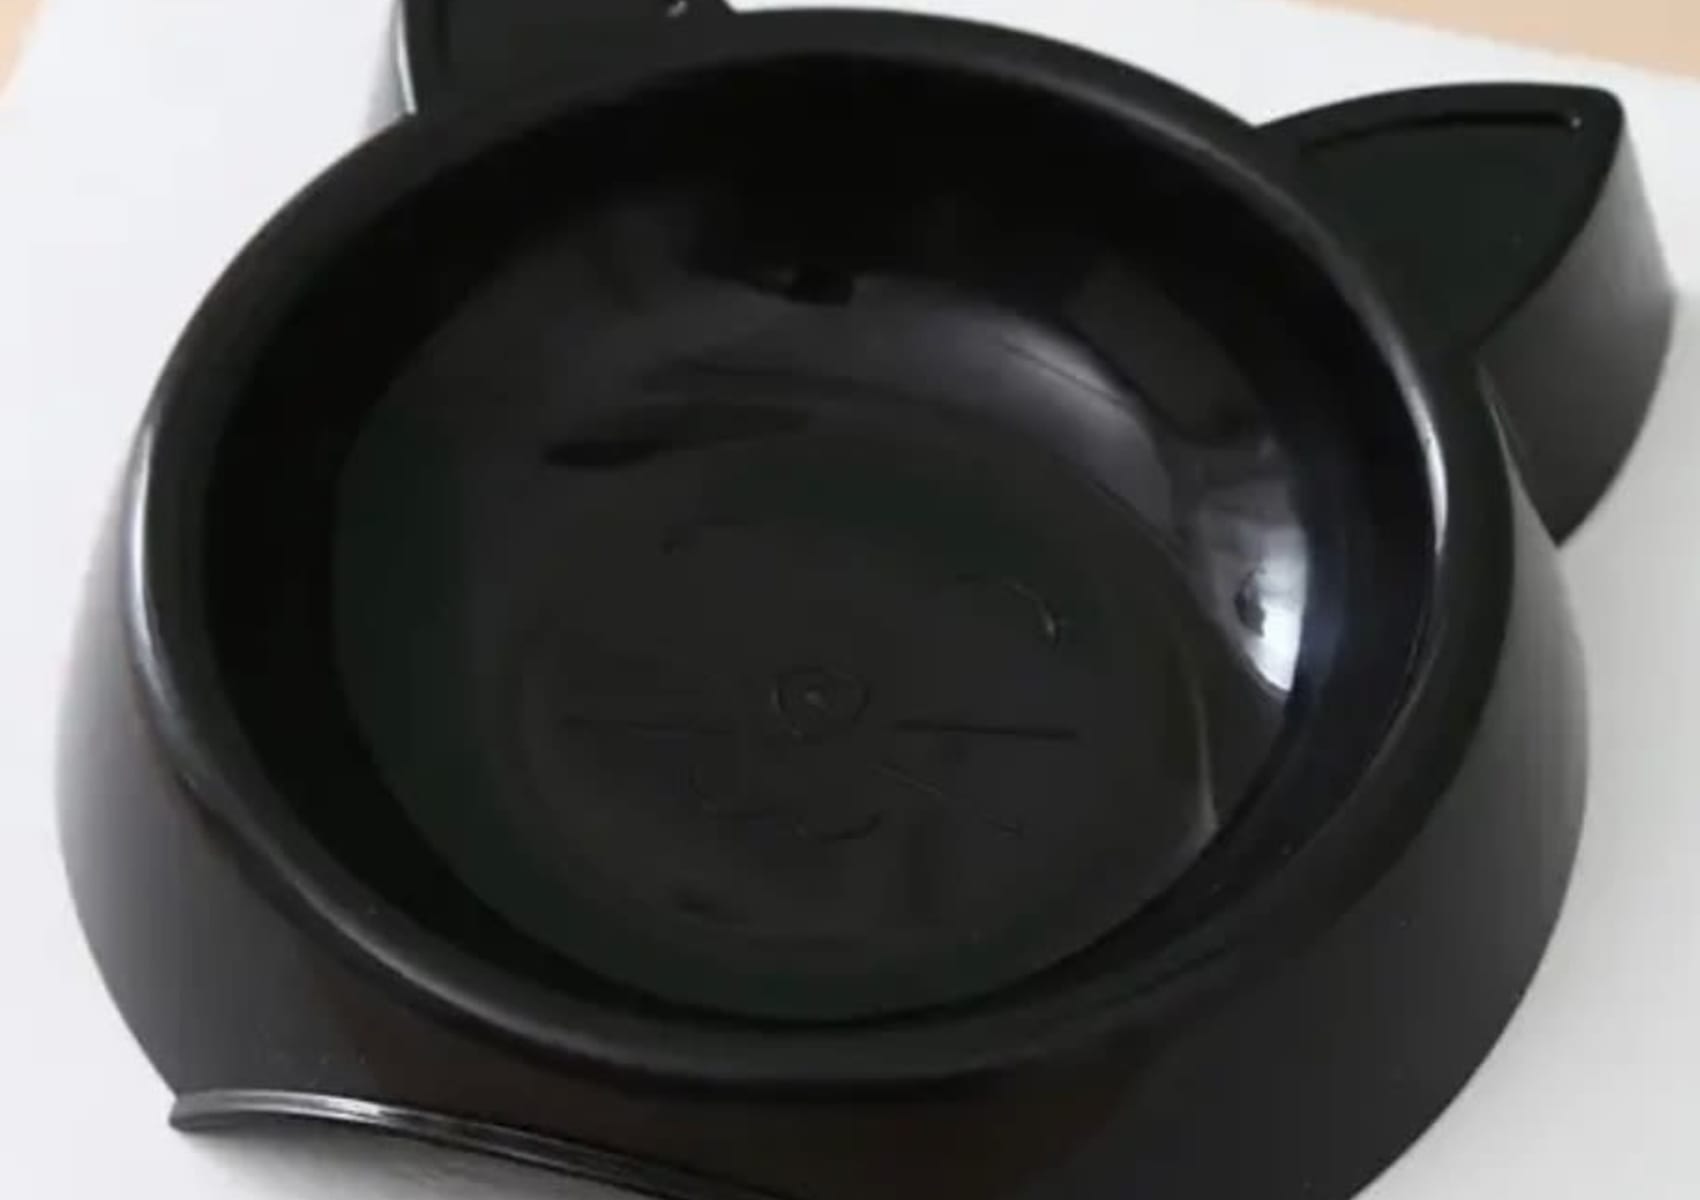 Black cat shaped food or water bowl with cat face